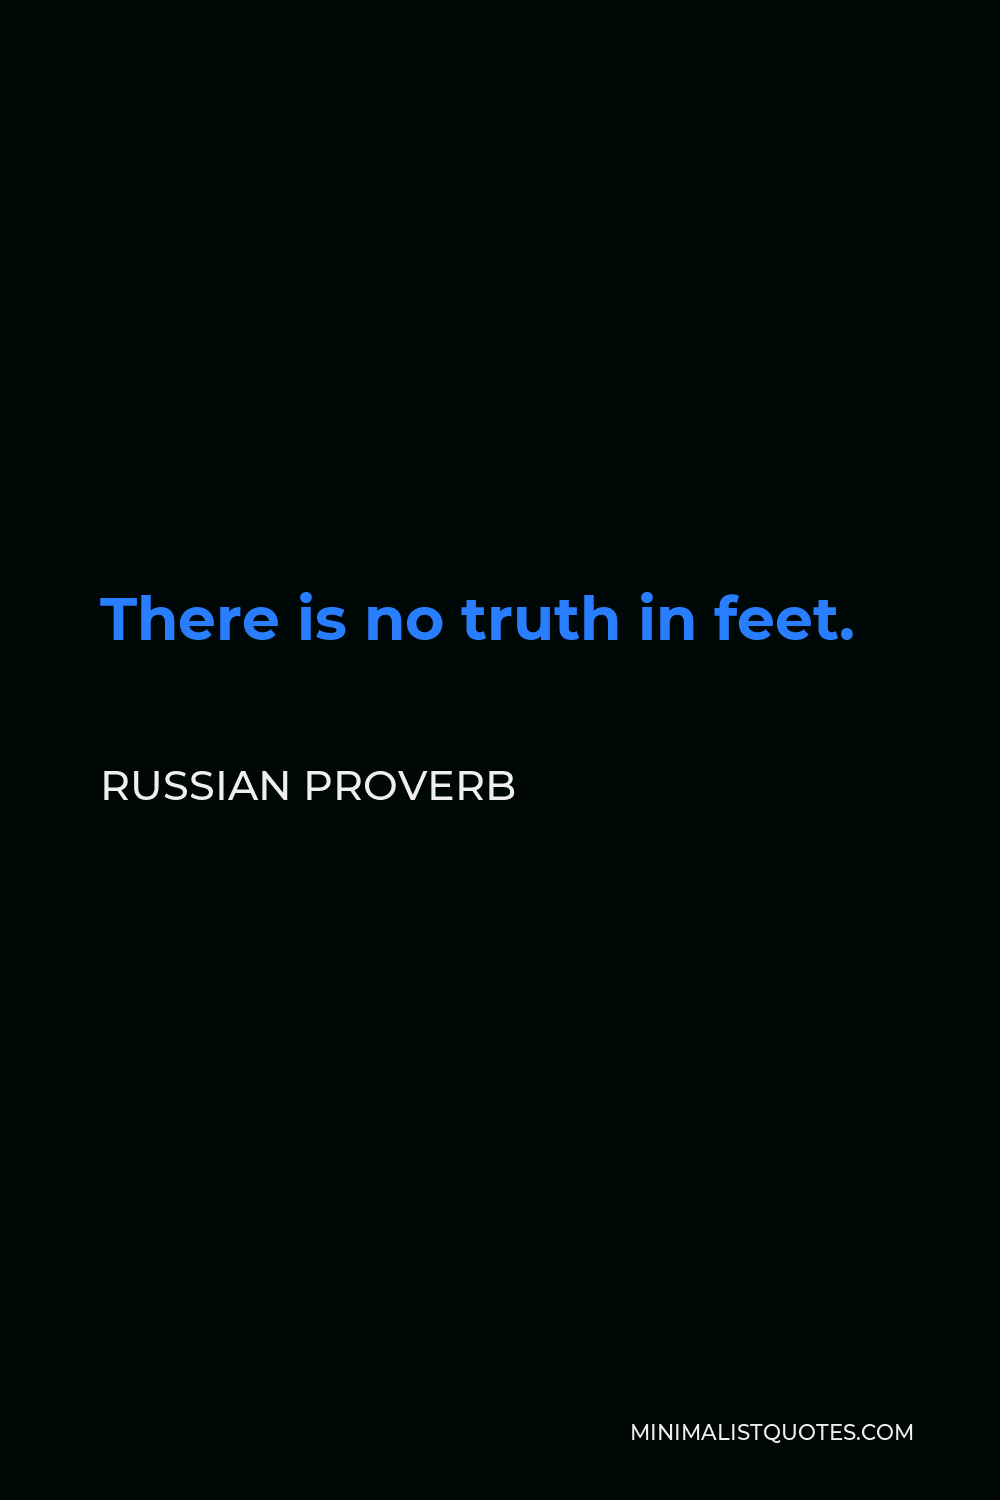 Russian Proverb Quote - There is no truth in feet.